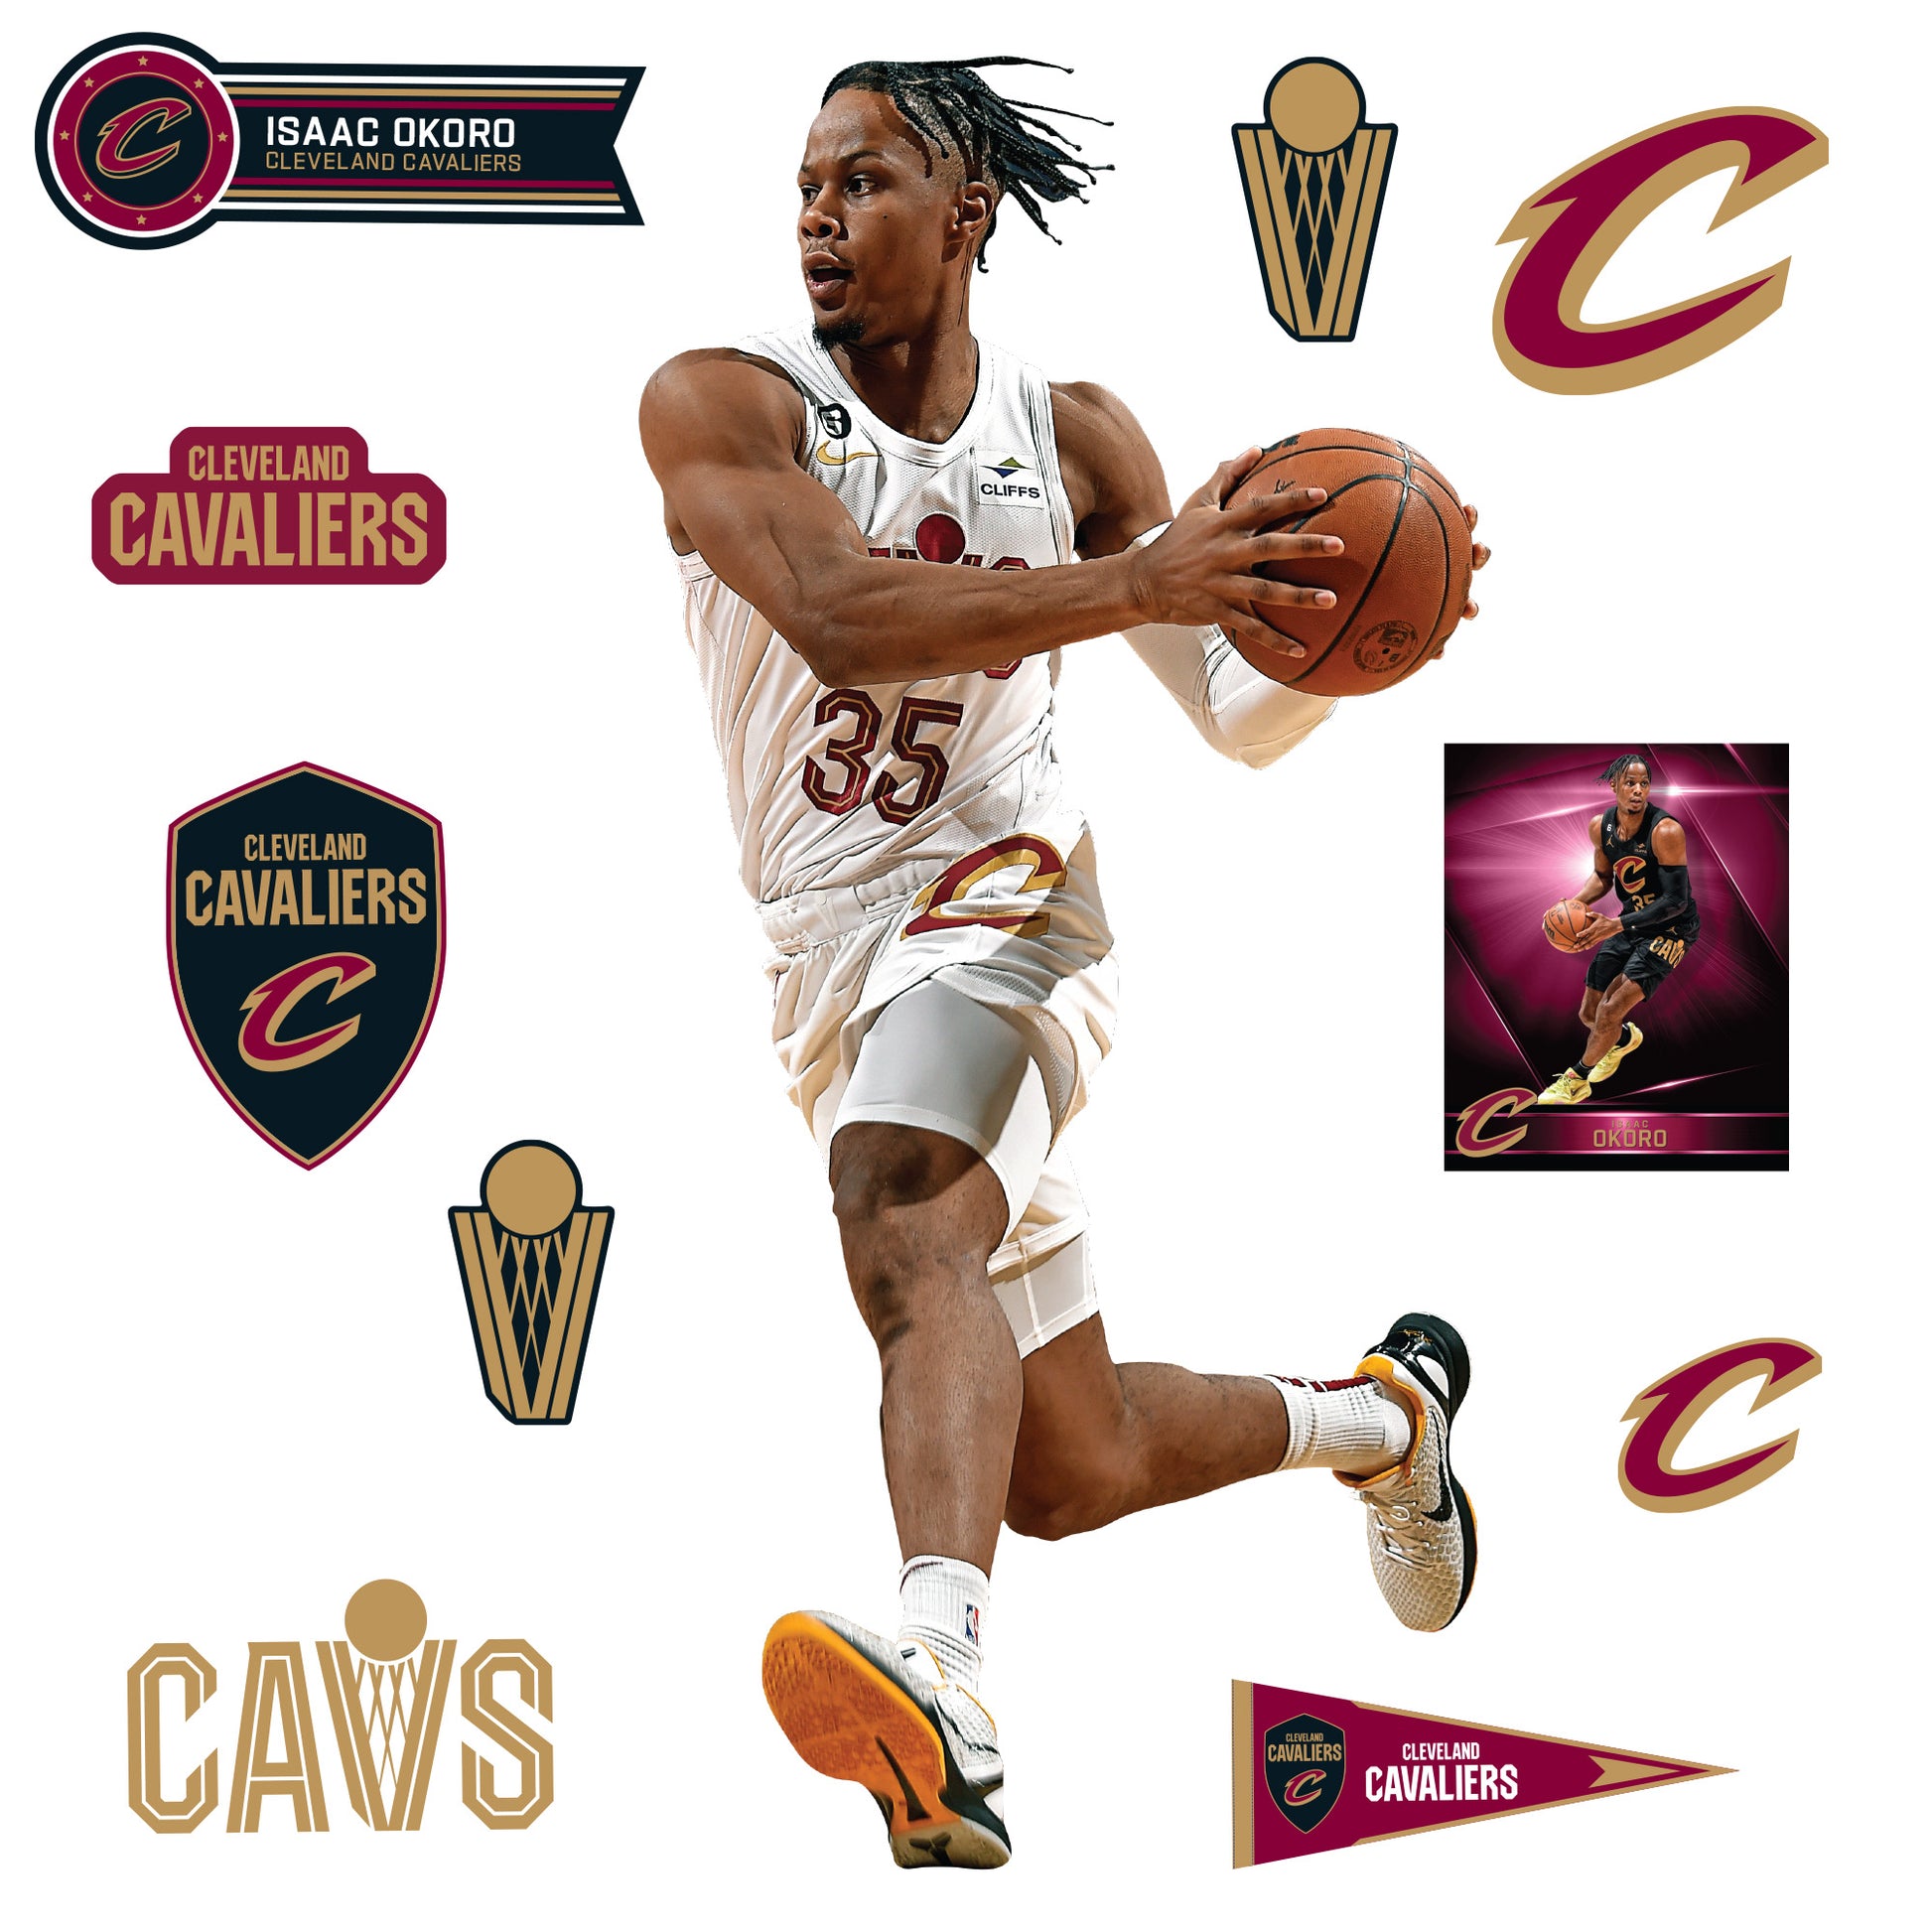 Isaac Okoro is no longer viewed as core player for the Cleveland Cavaliers